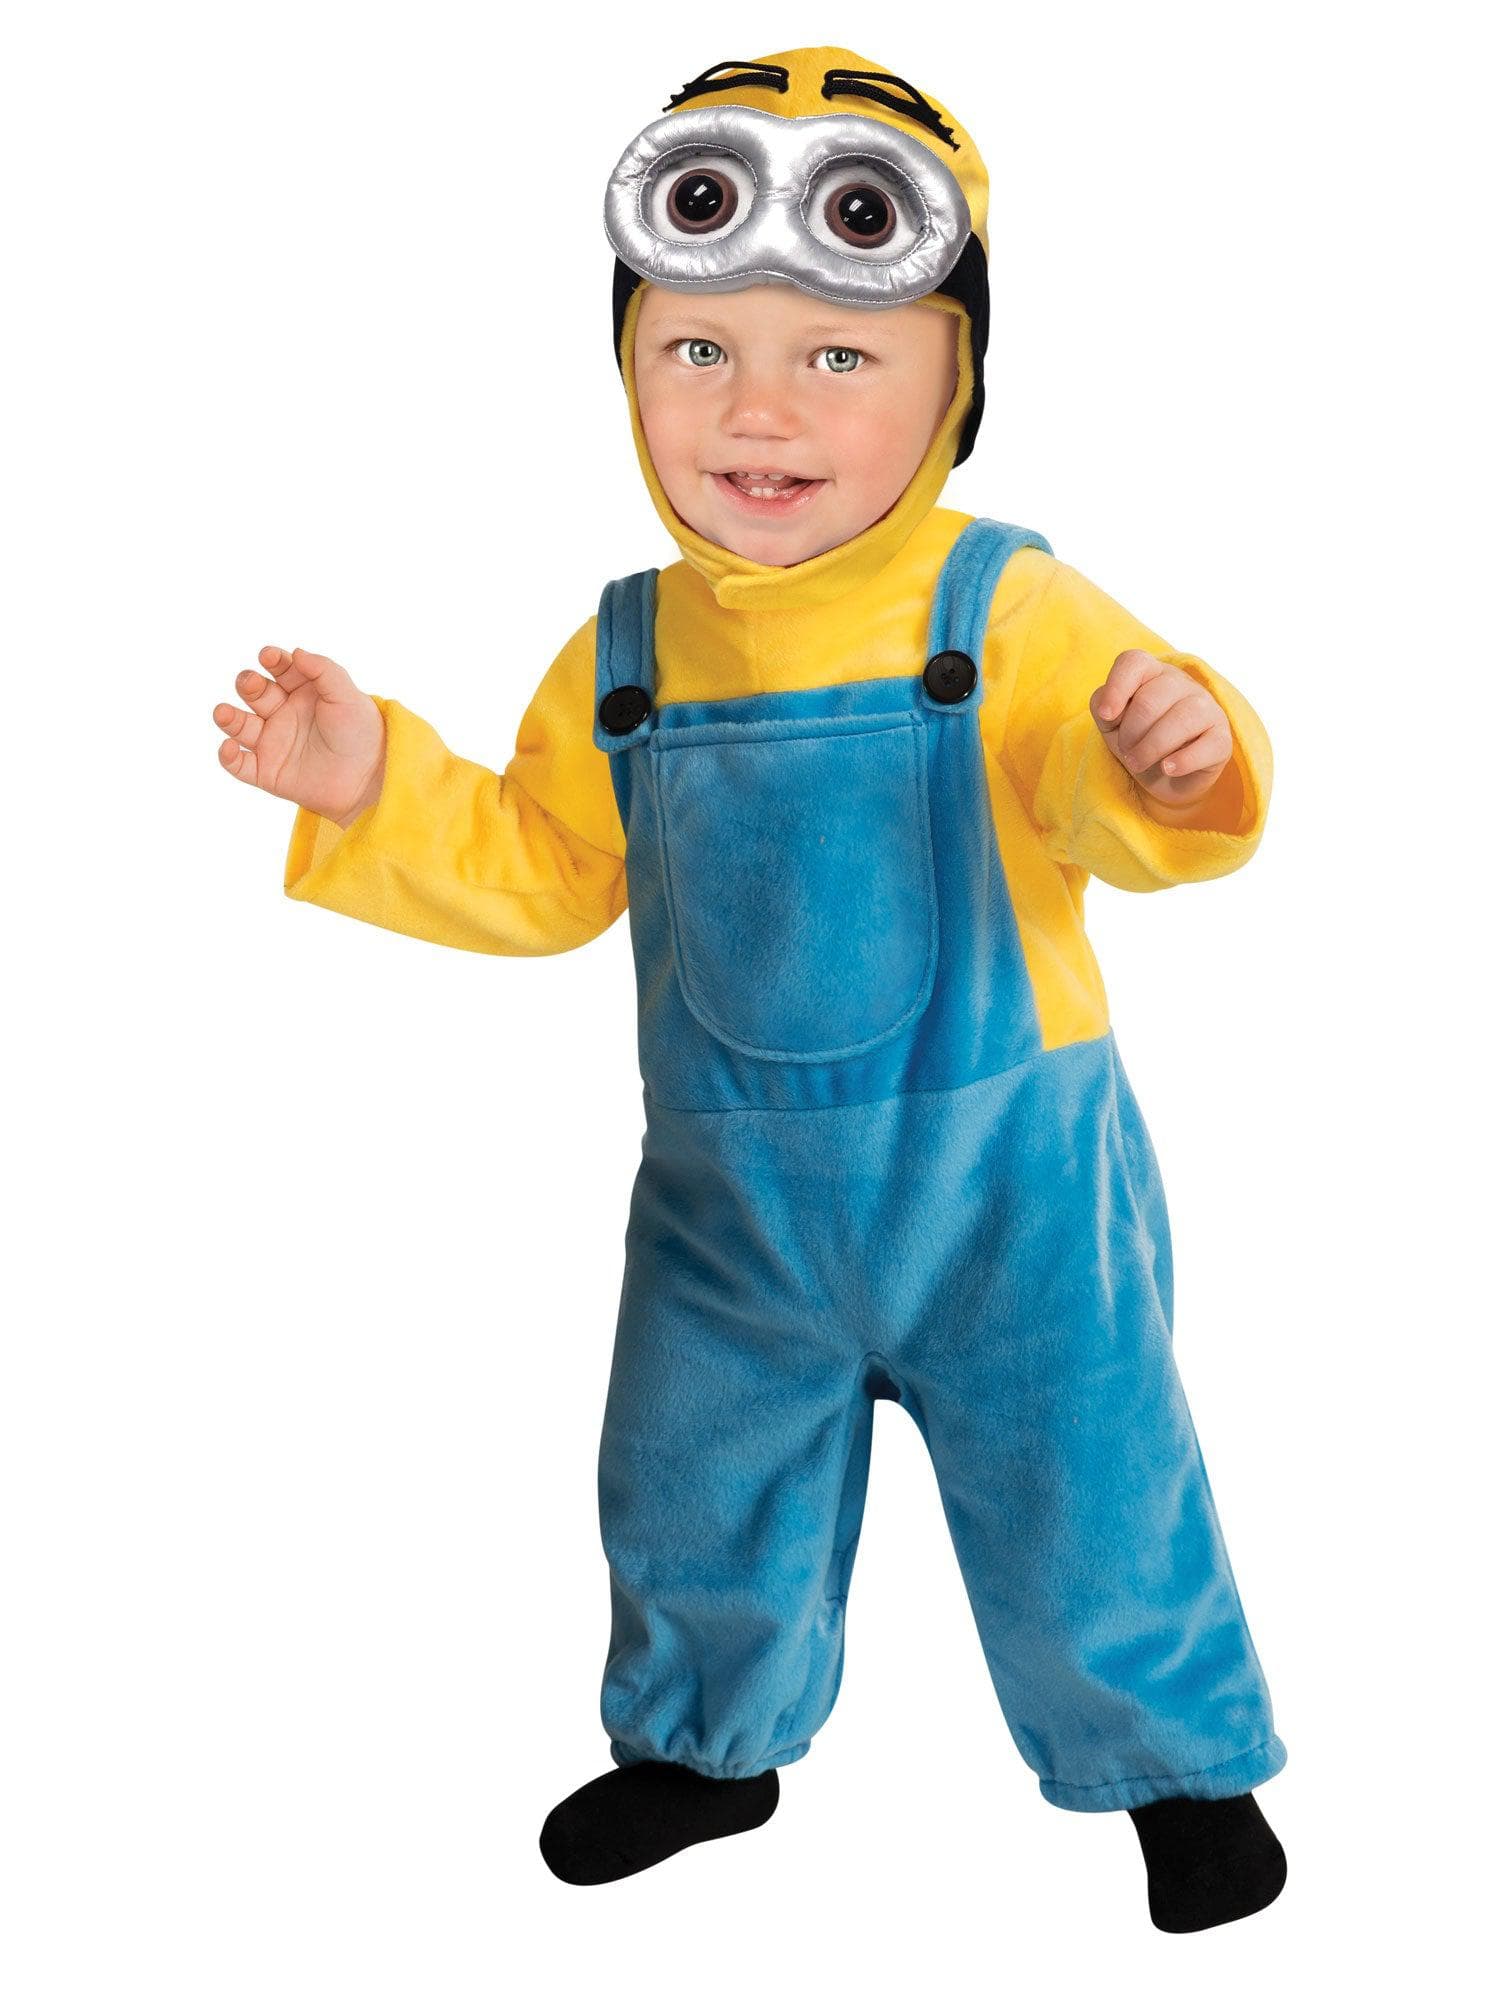 Despicable Me Minion Boy Costume for Toddlers - costumes.com